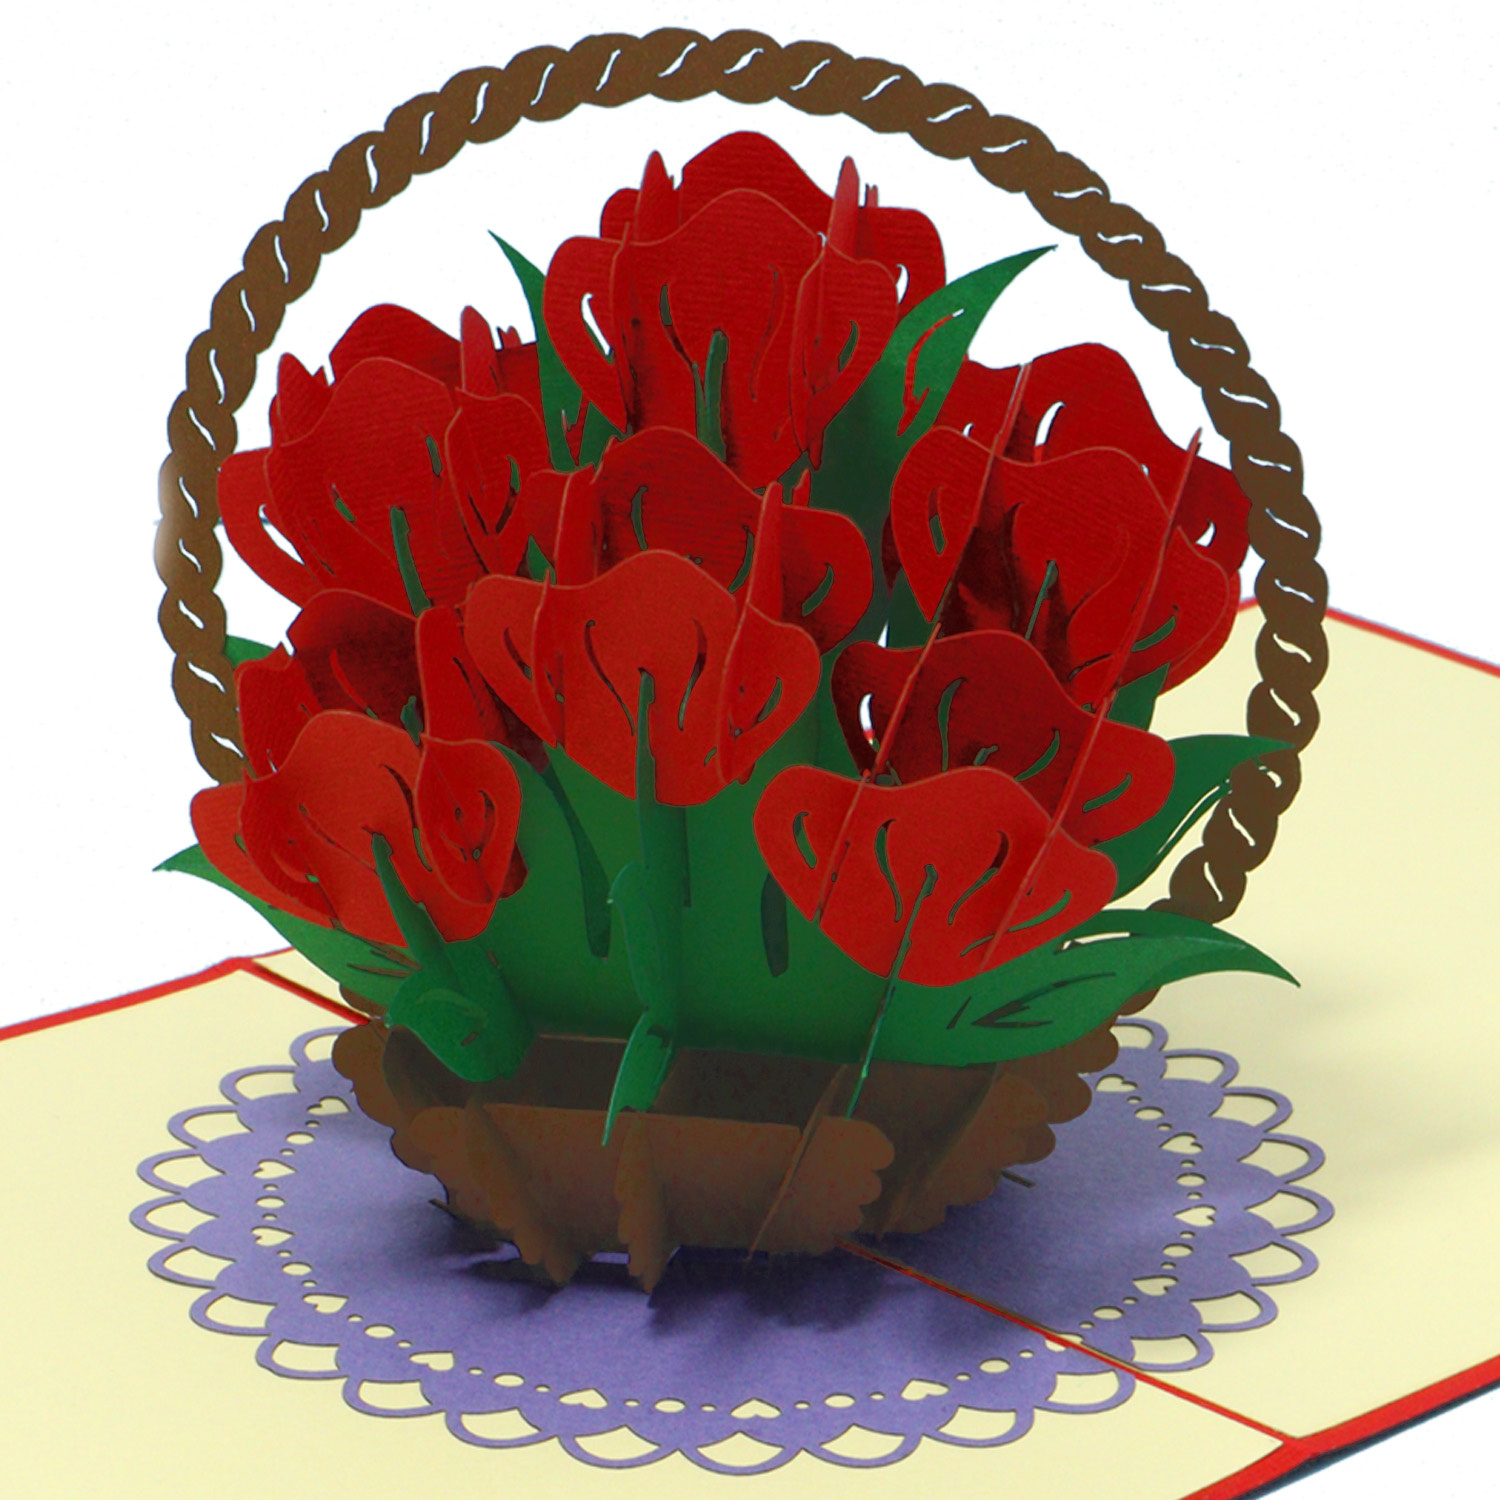 LINPOPUP POP UP Card - Roses - 3D Flower Basket Birthday Card - Wedding - Mother's Day - Anniversary - Gift - Greeting Card with Floral Motif - Folding Card Red, LIN17752, LINPopUp®, N720